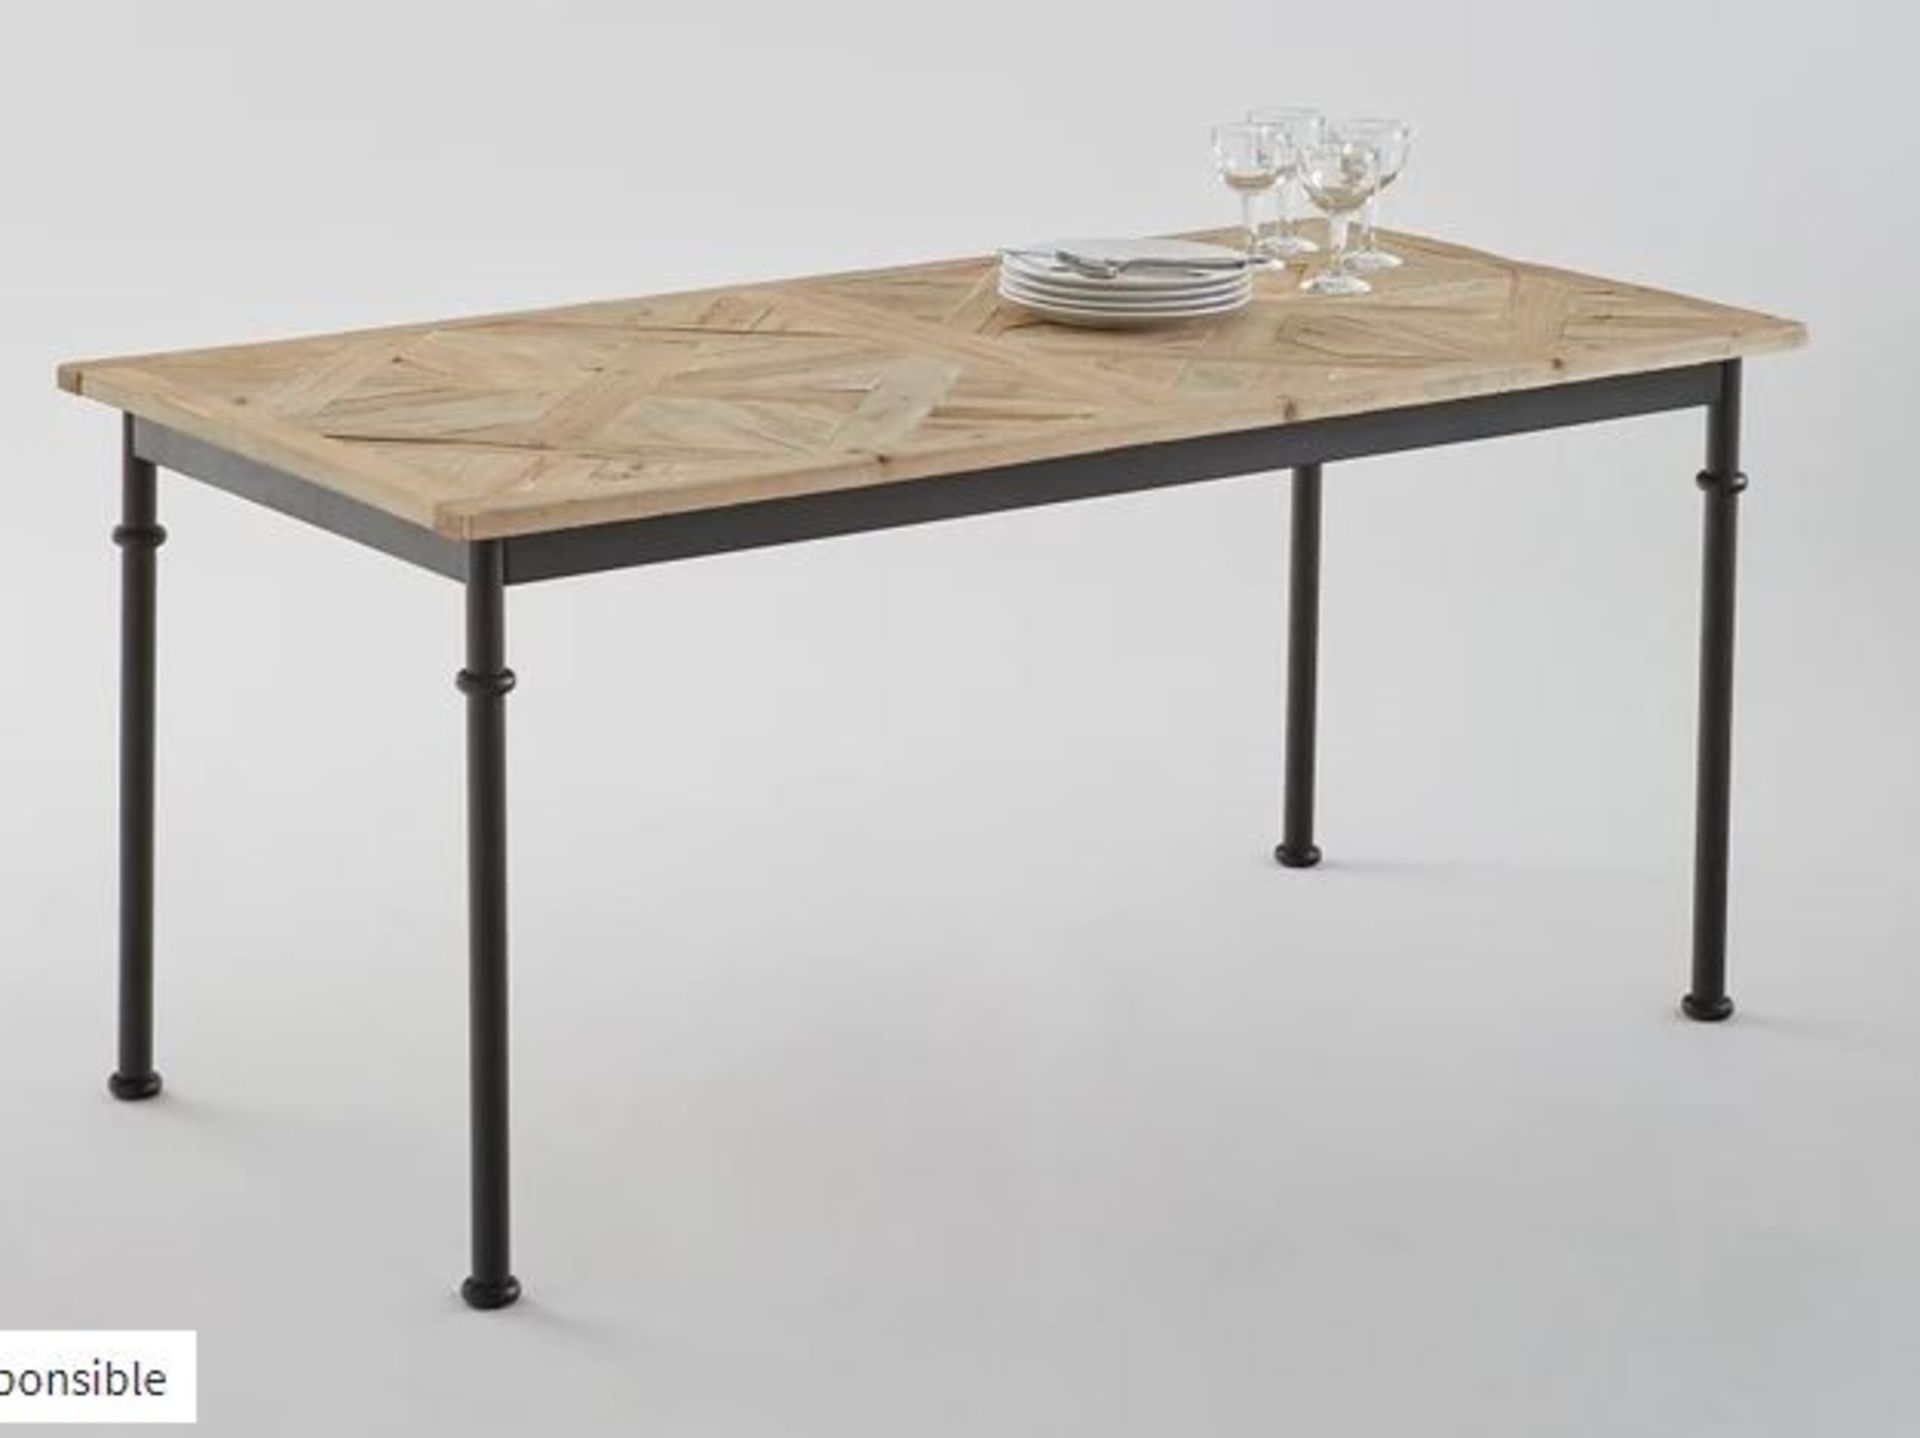 LA REDOUTE MOSAÏQUE INLAID DINING TABLE (SEATS 6)